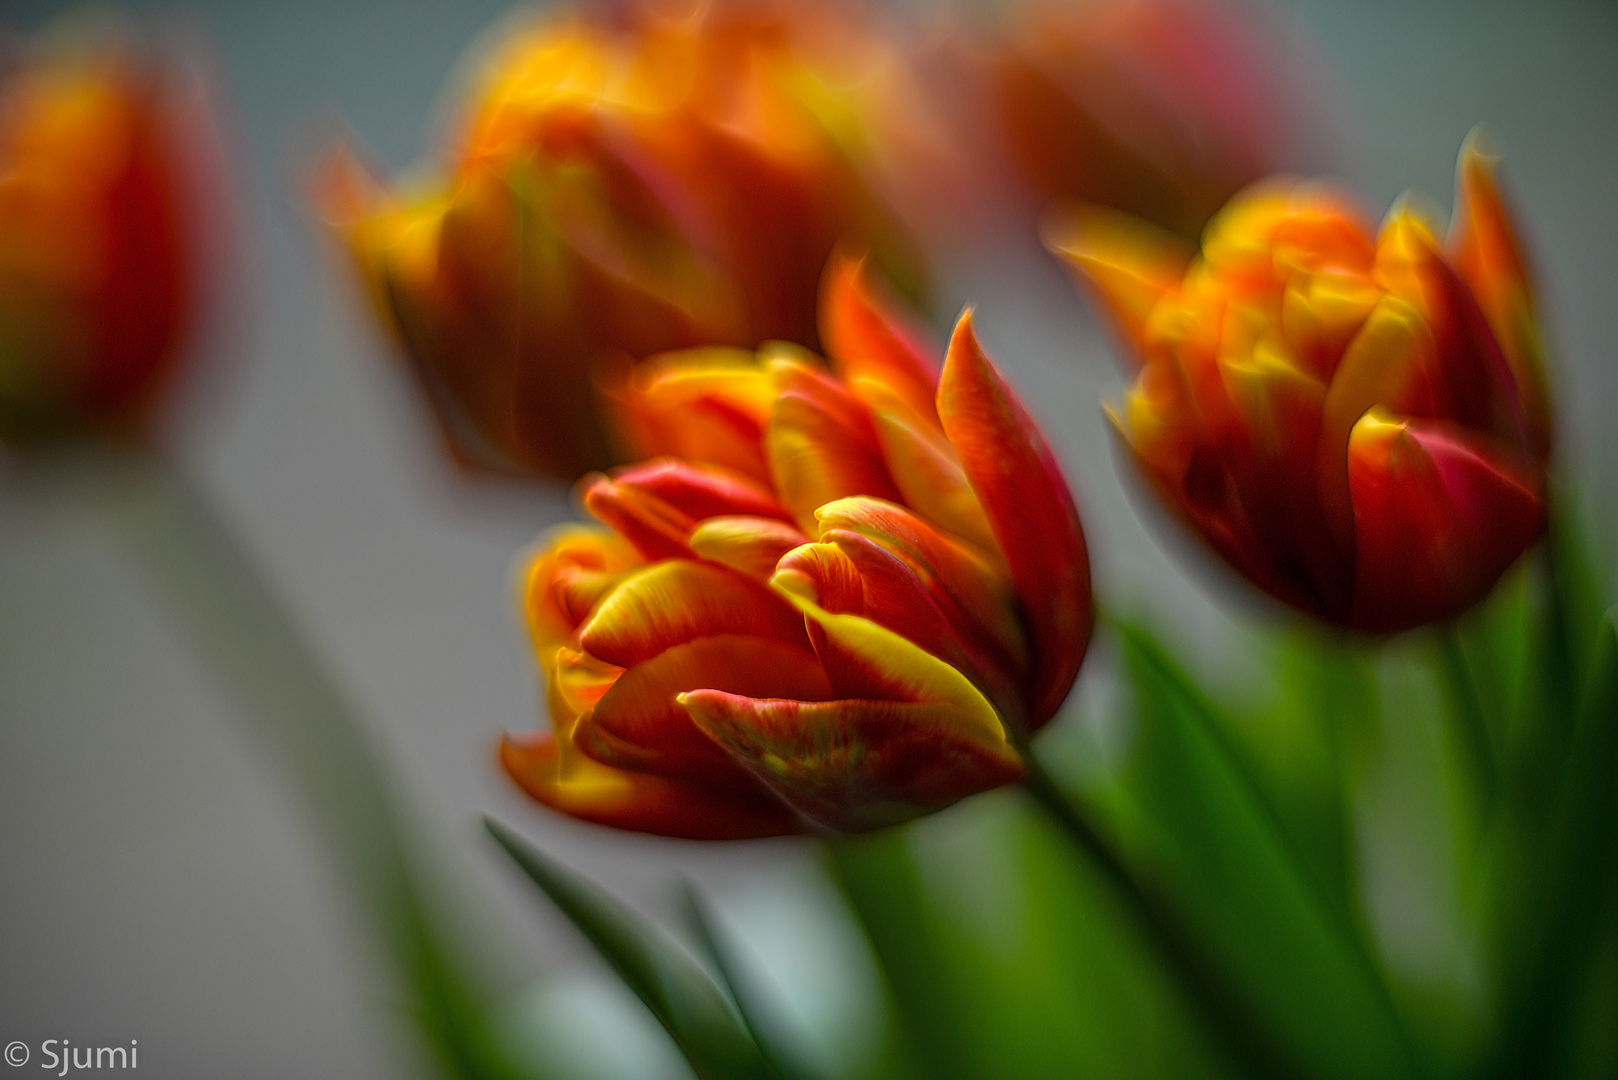 Some tulips...